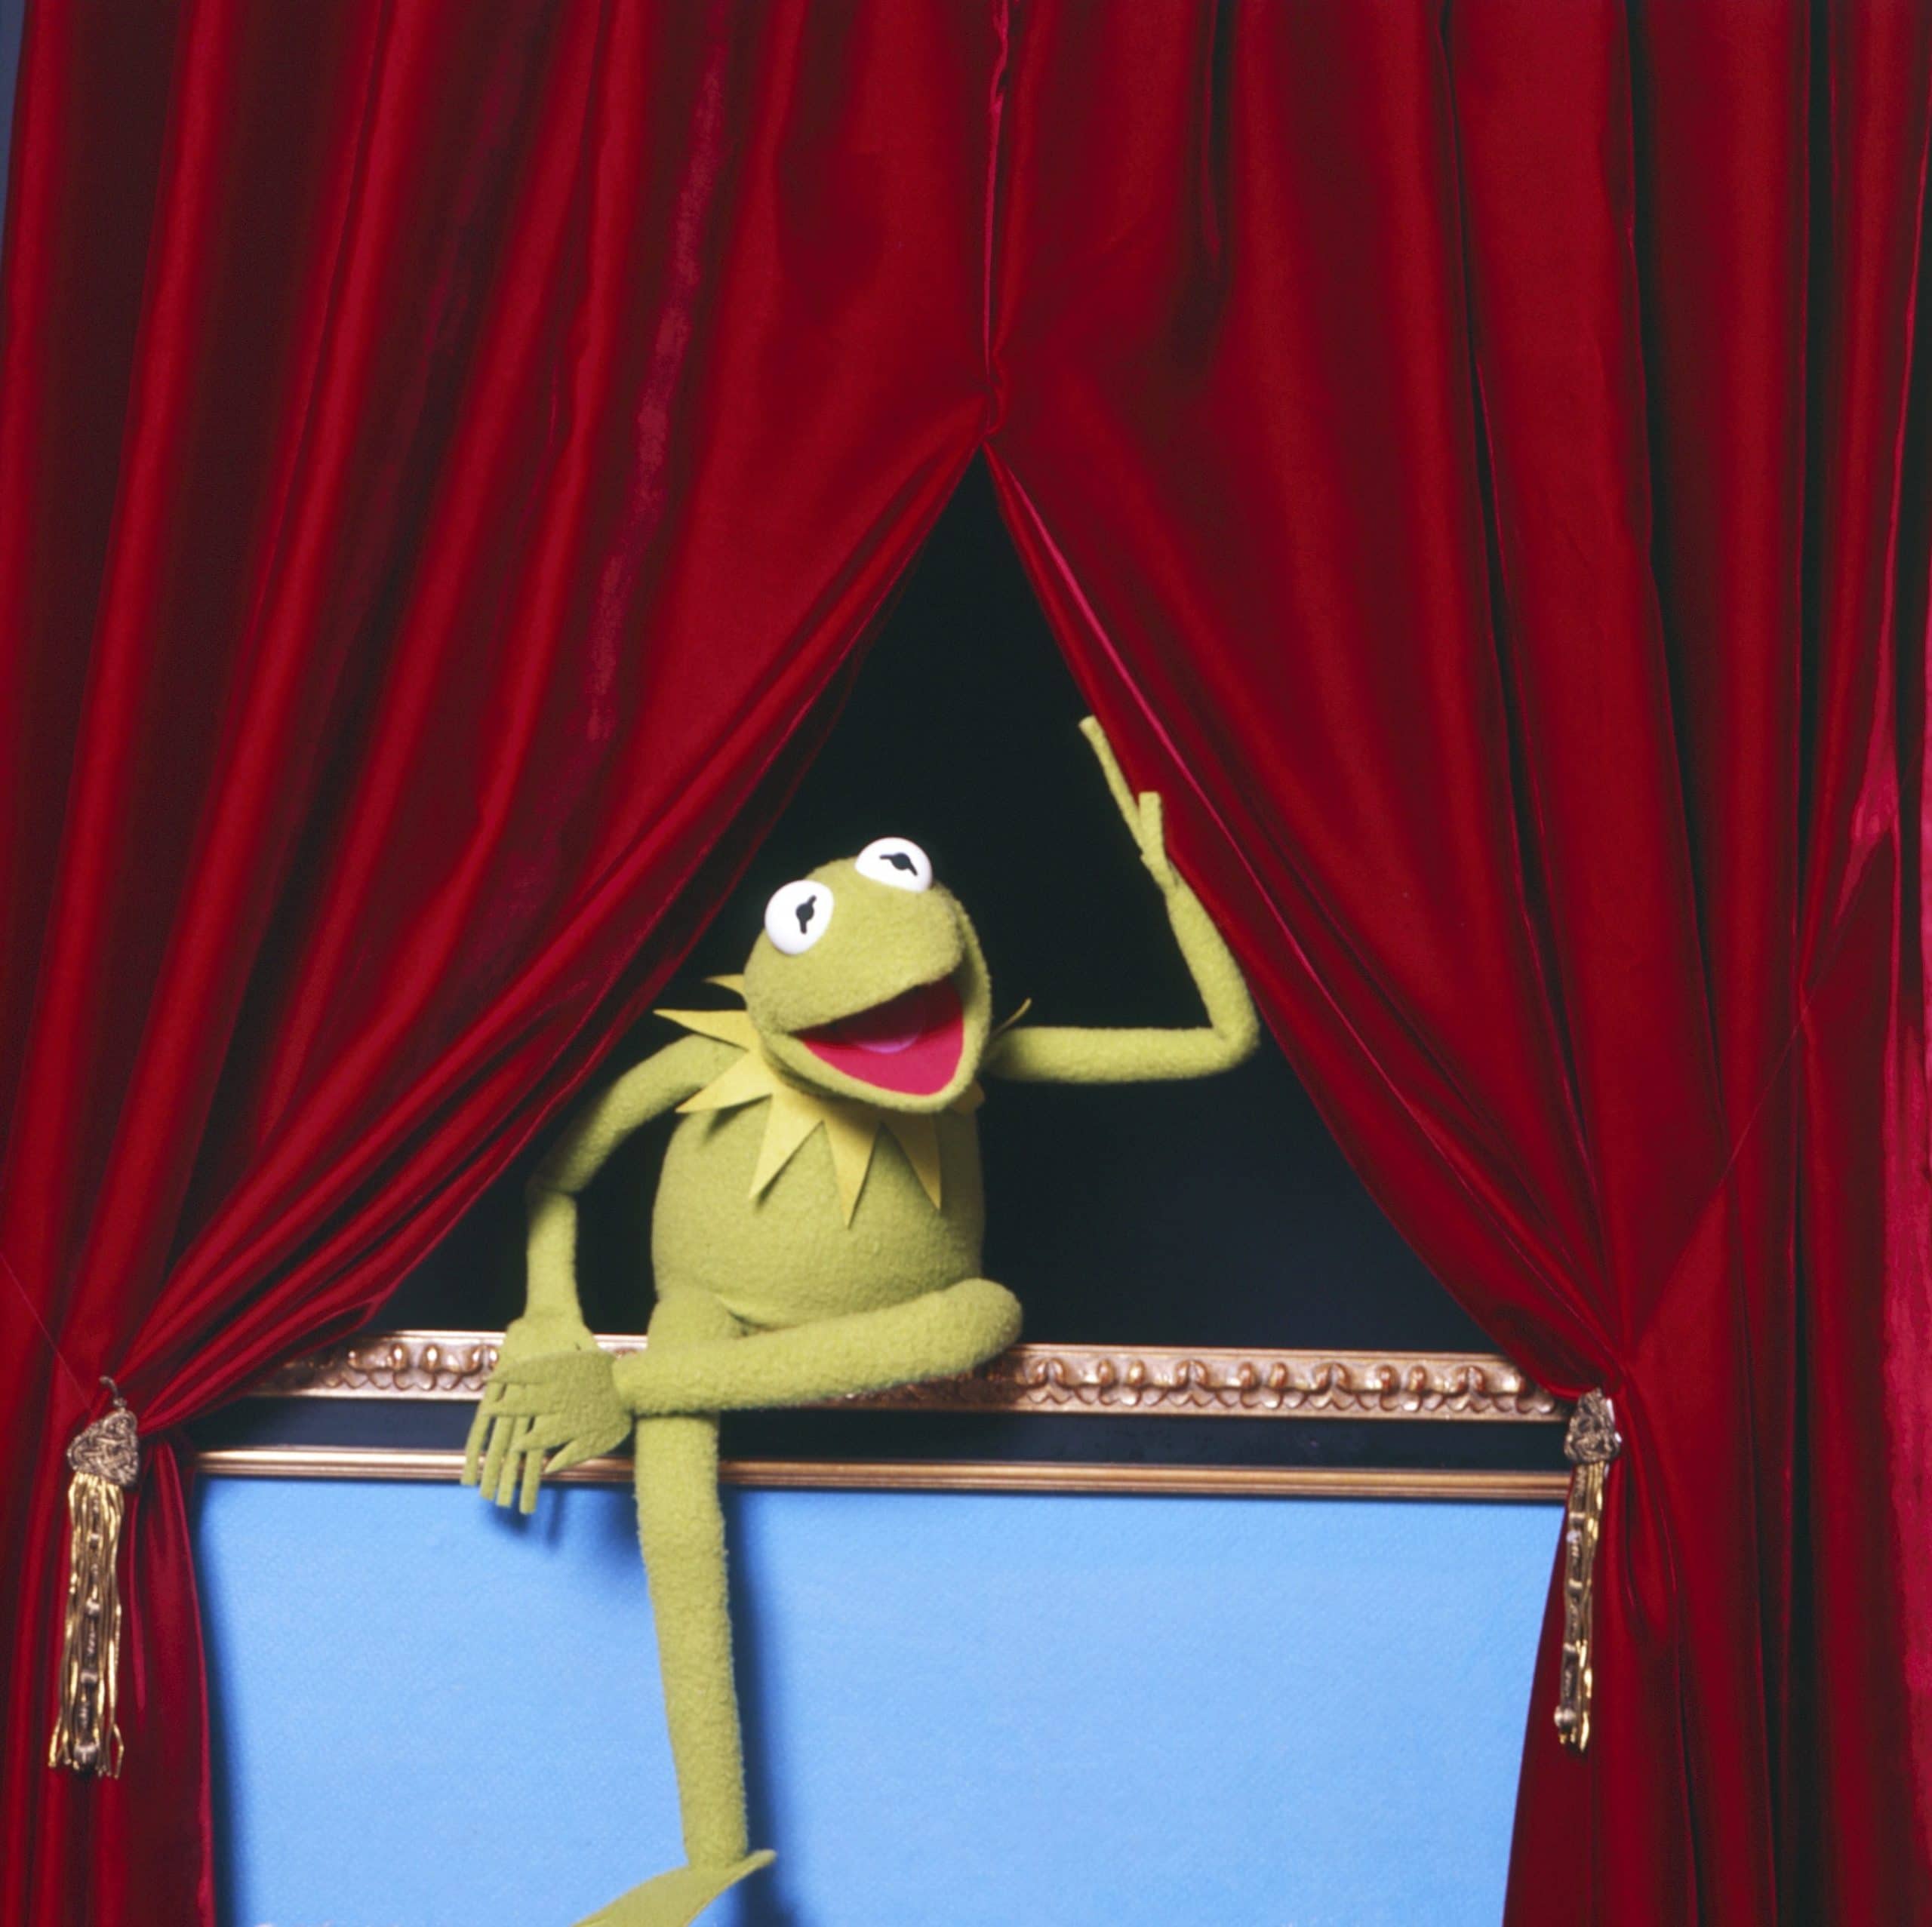 Disney+ Includes Disclaimer That Old Episodes Of 'The Muppet Show' Has Offensive Content